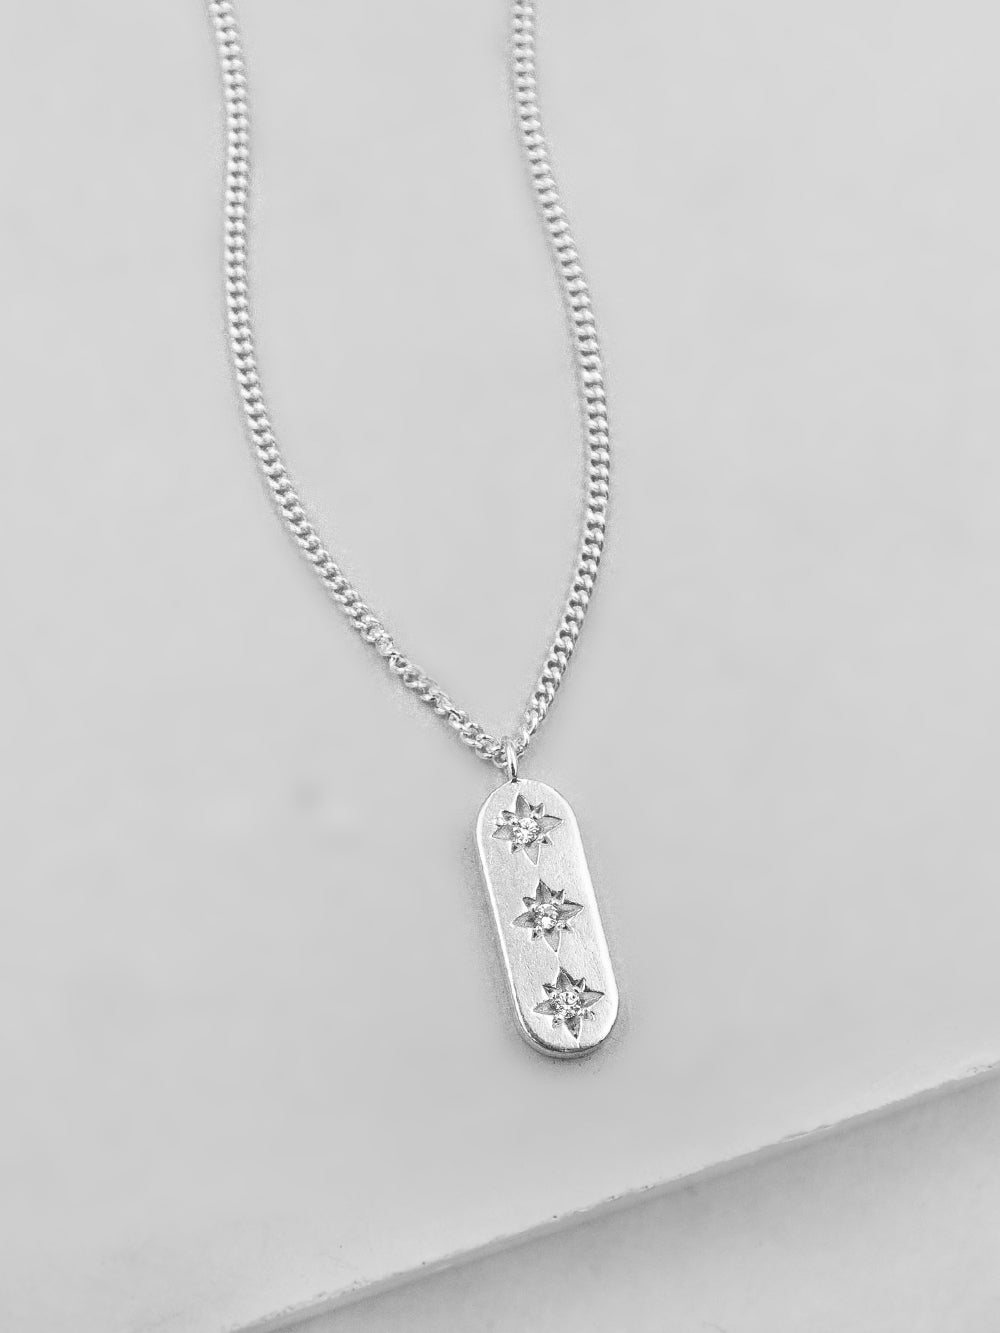 3 Star Tag Necklace